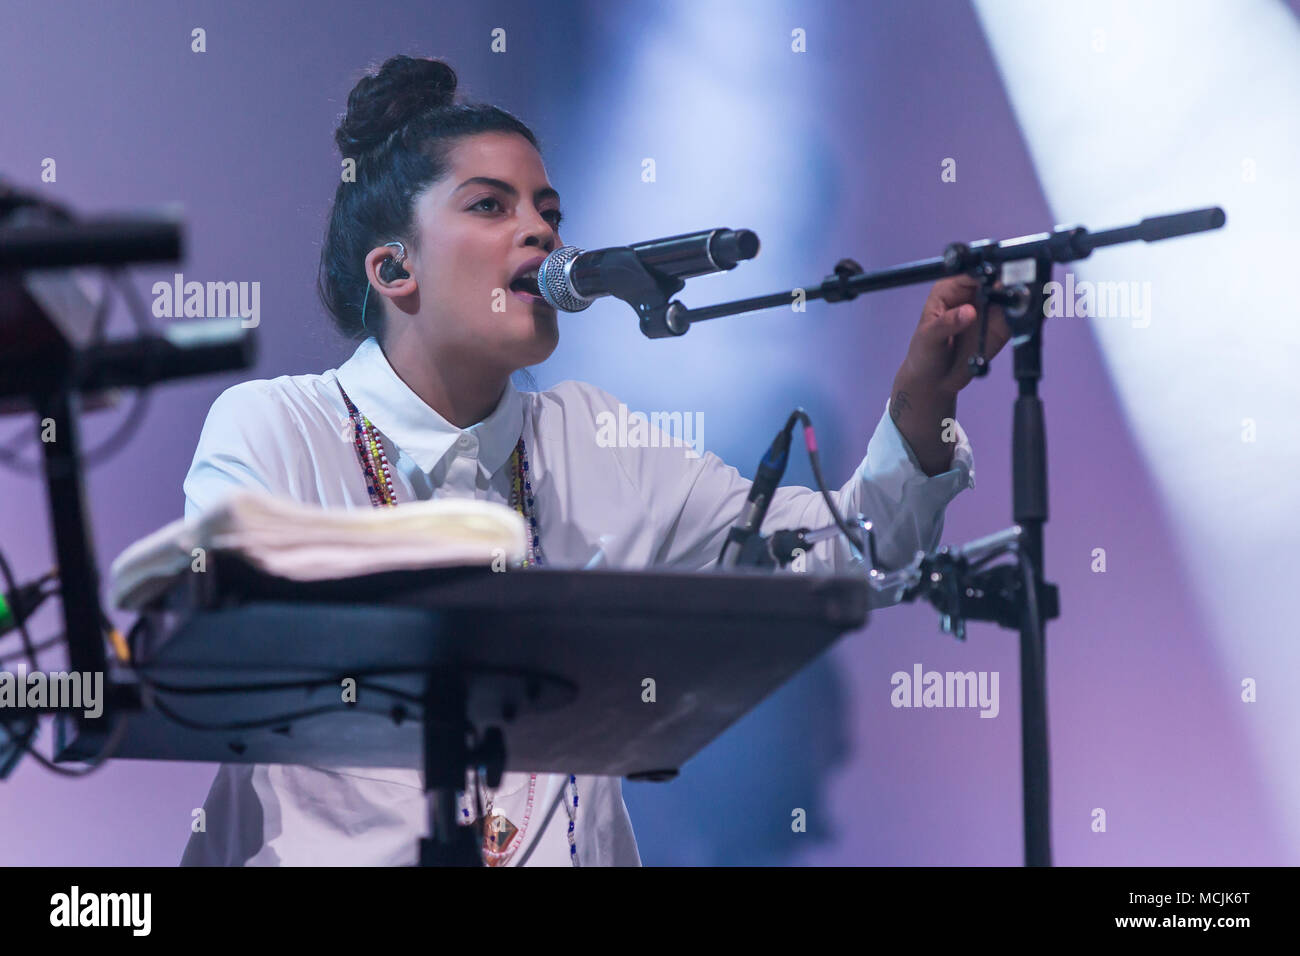 The French-Cuban music duo Ibeyi, which consists of the twin sisters Lisa-Kaindé and Naomi Díaz, will perform live at the Blue Stock Photo